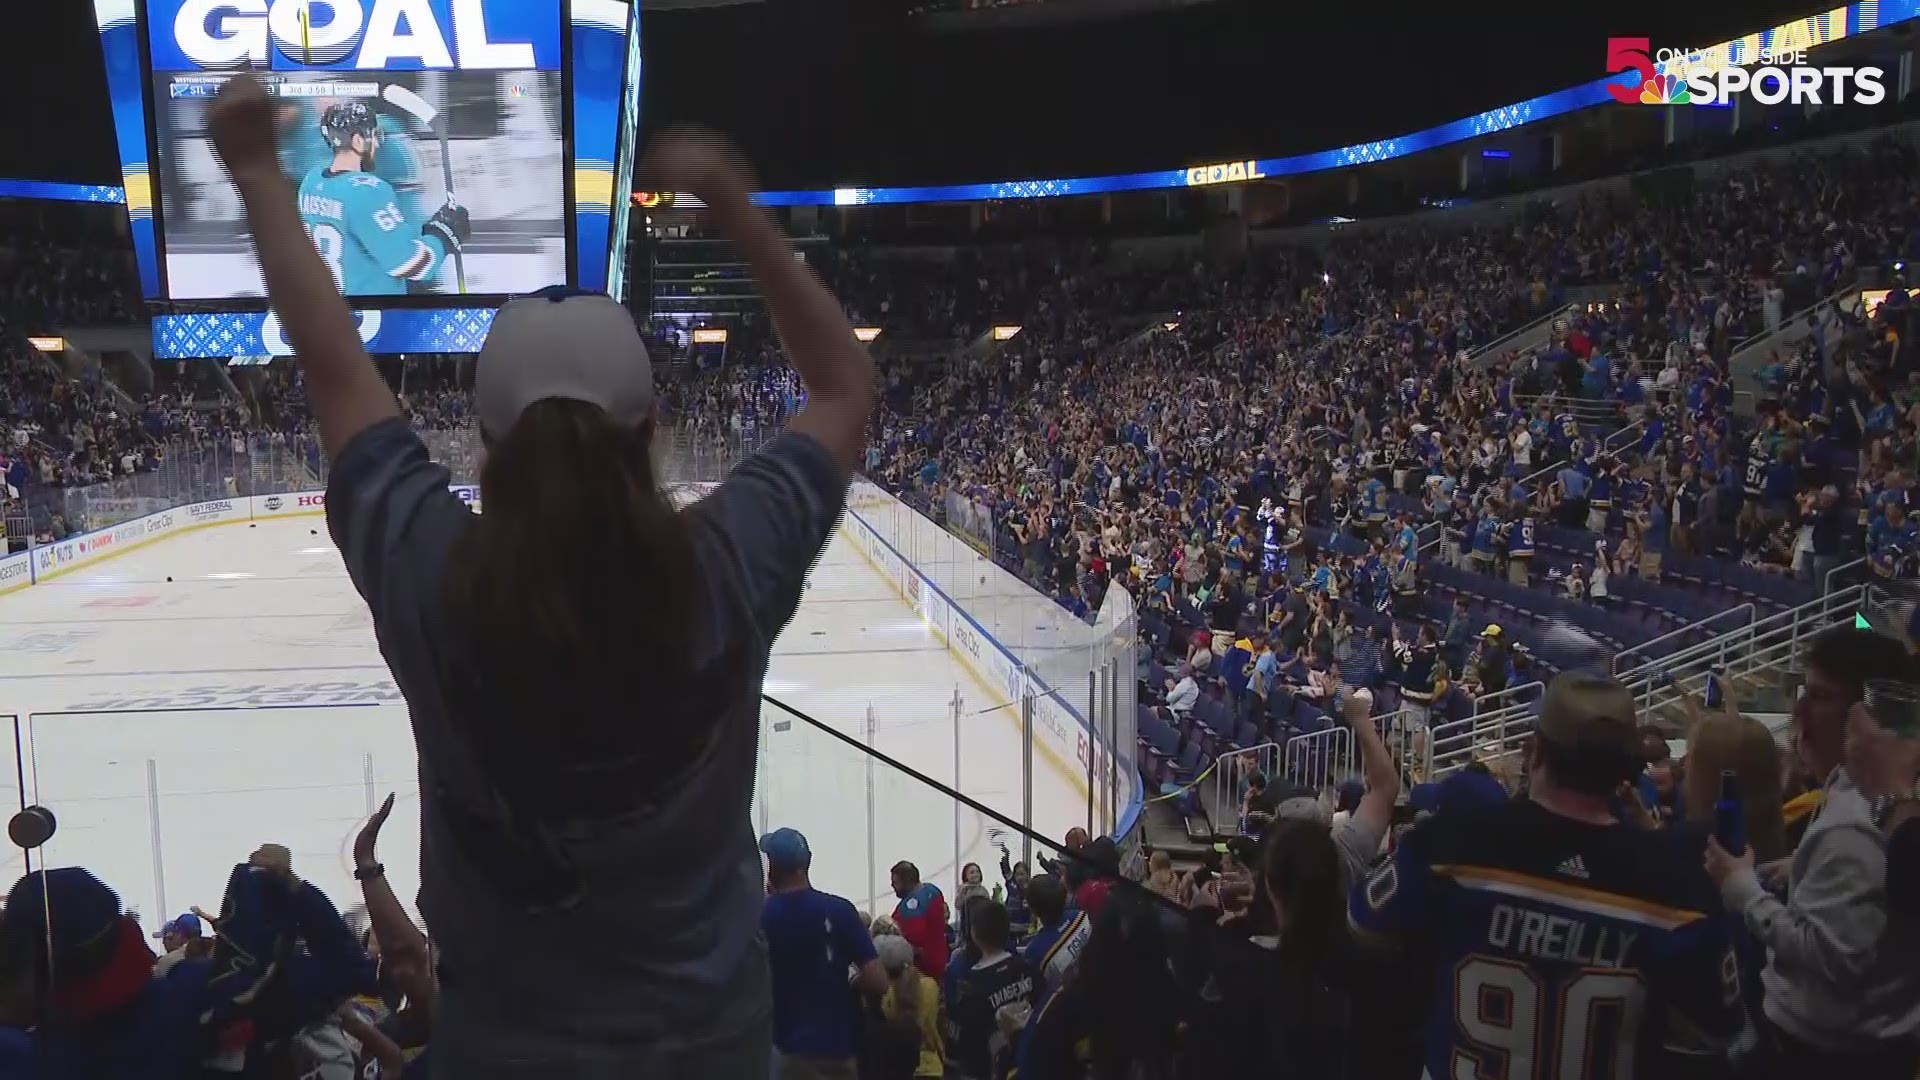 Game 5 wasn't in St. Louis, but Blues fans still packed the Enterprise Center for a watch party. They even threw hats onto the ice when Schwartz got his third goal of the game.